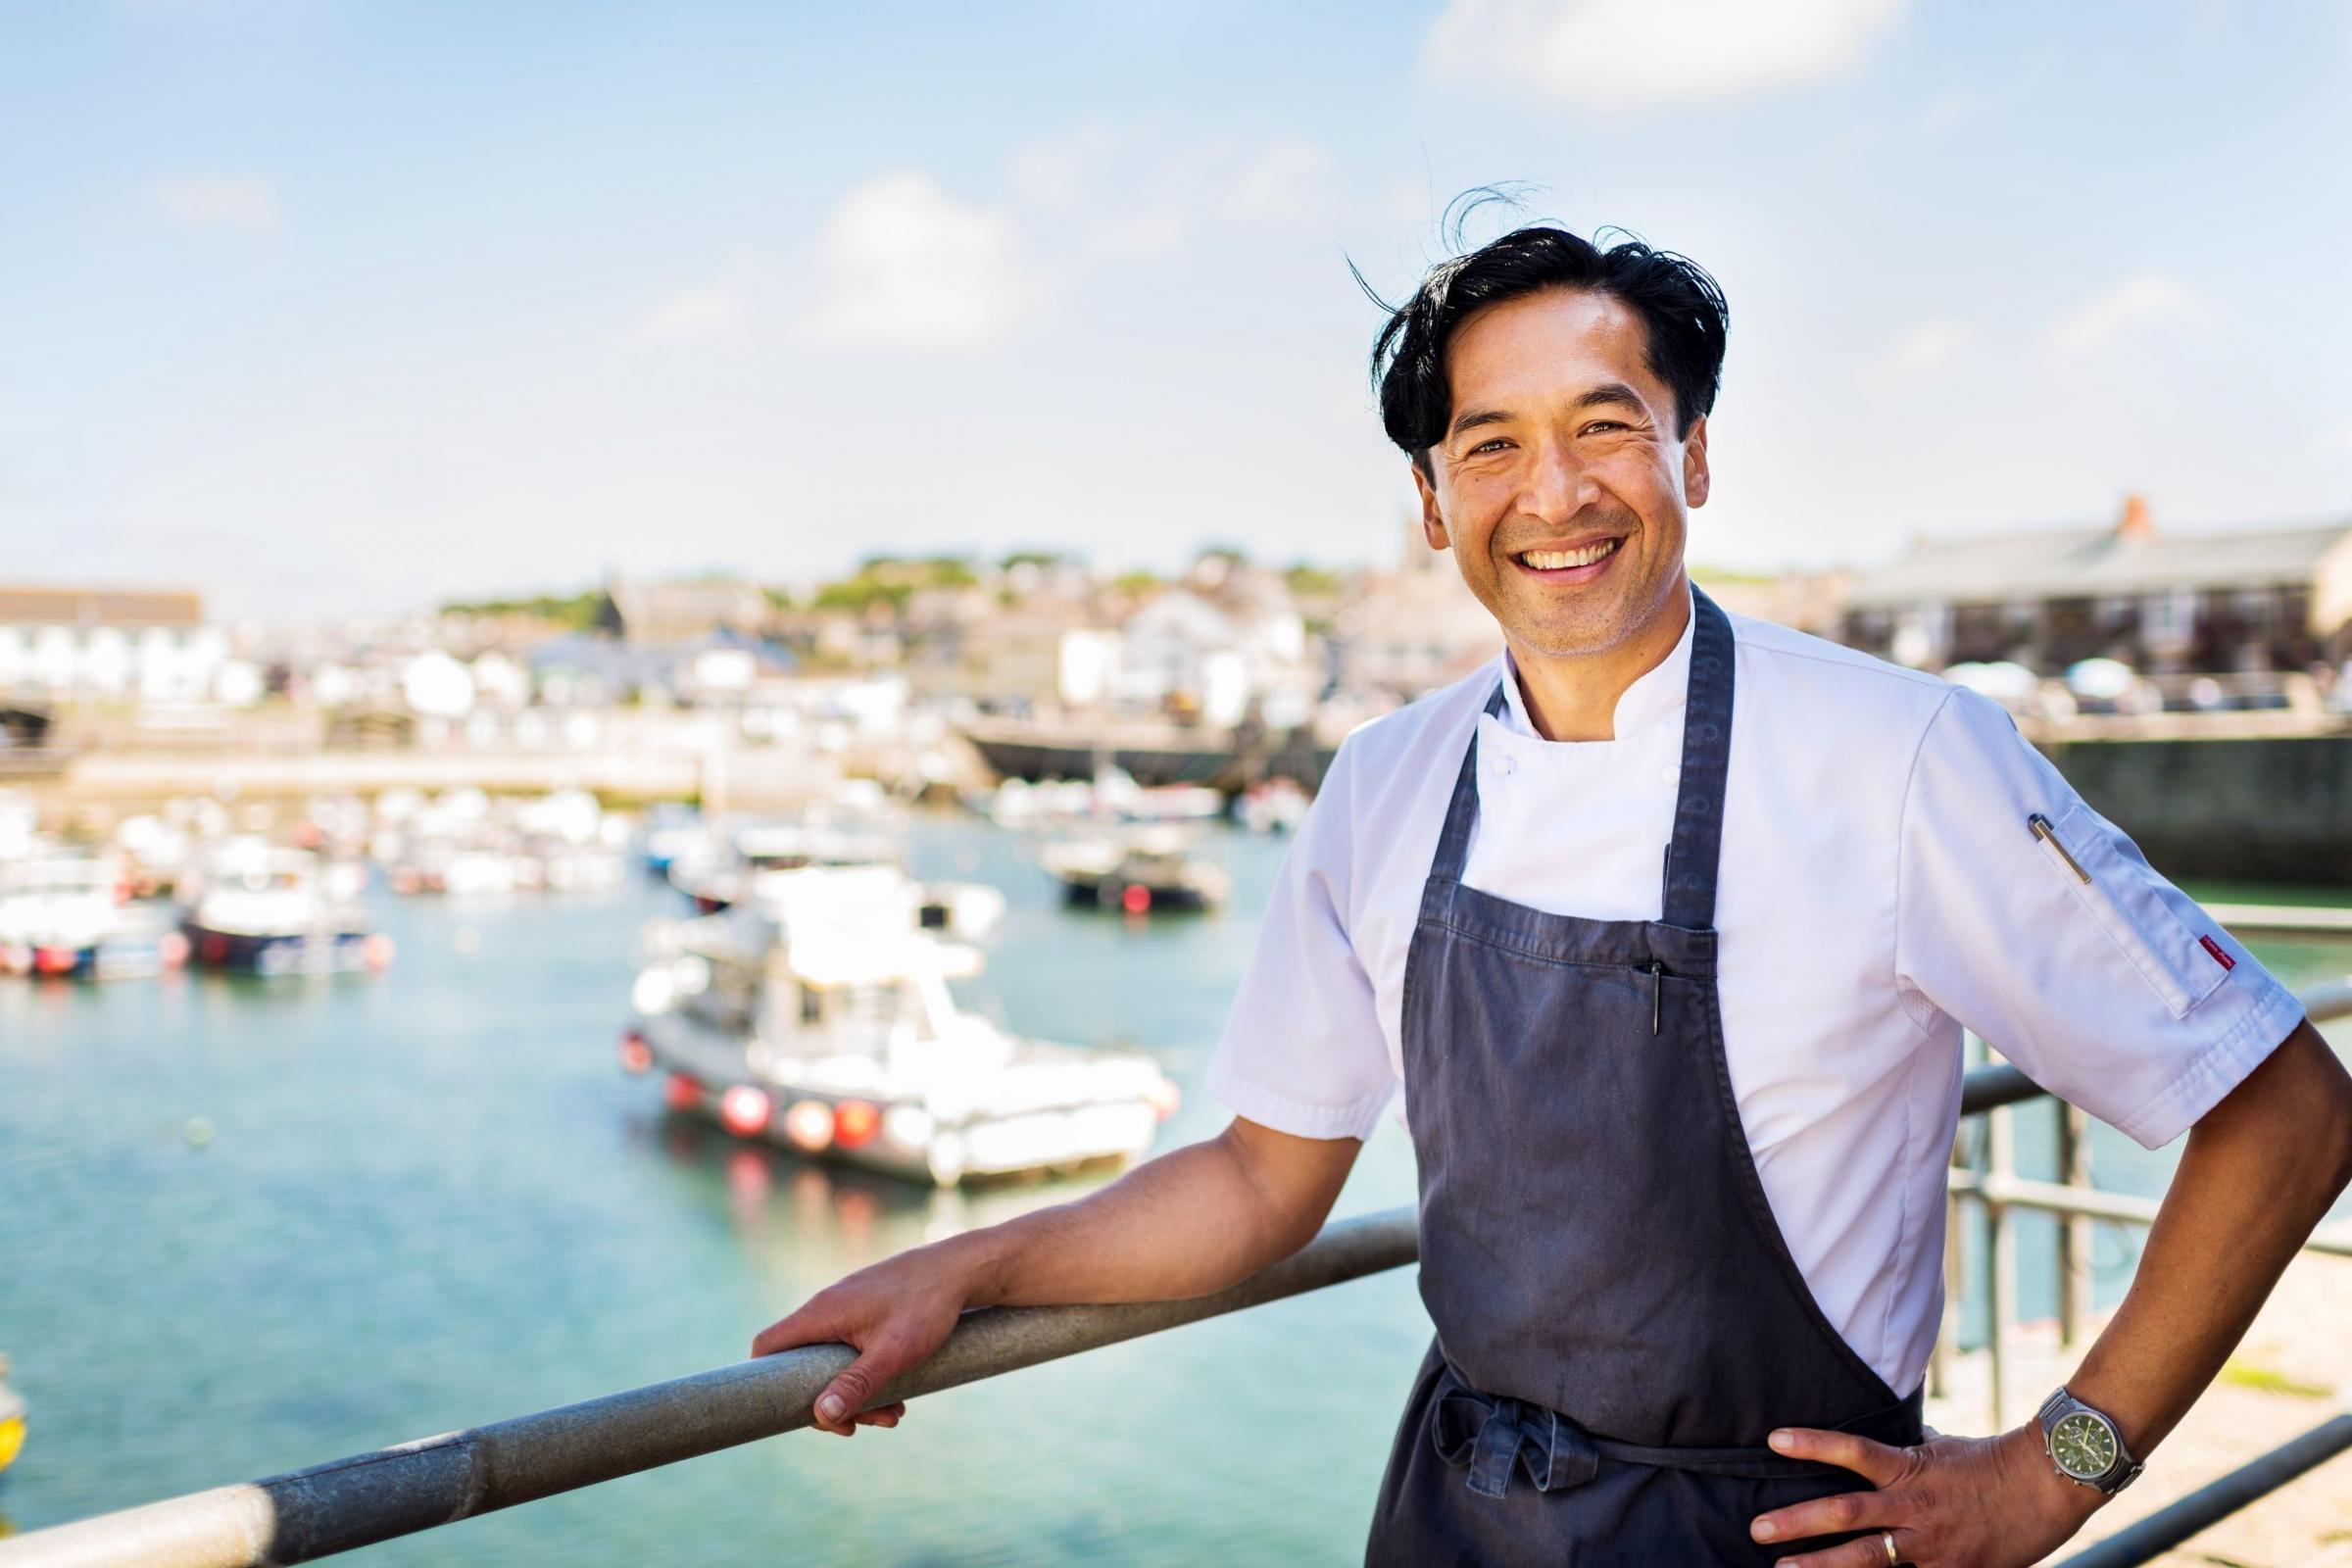 Jude Kereama, owner of Kota and Kota Kai. .has gathered the chefs together for this years Porthleven Food Festival